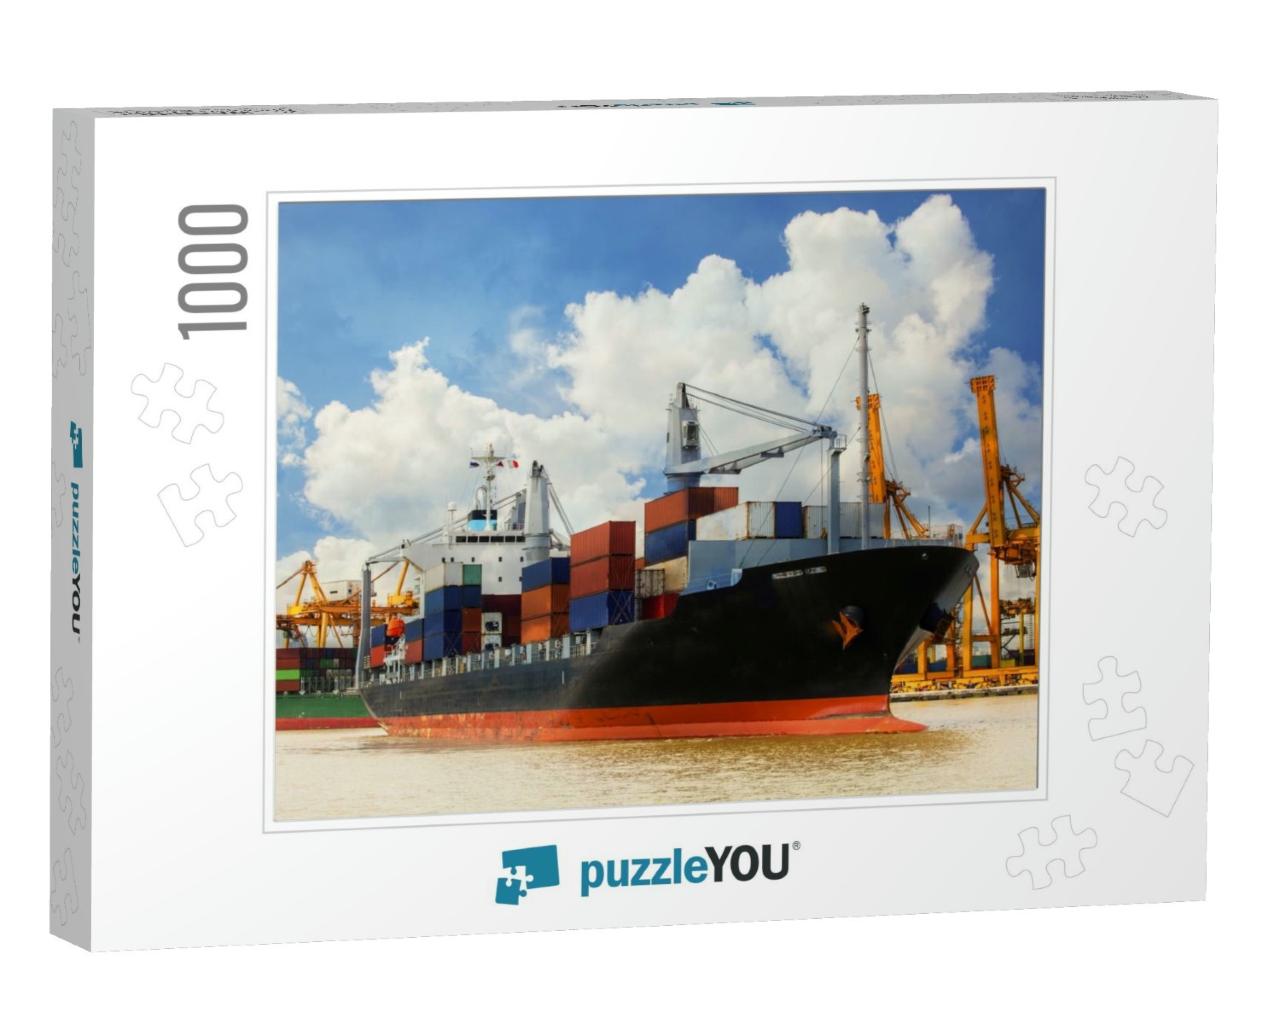 Shipping Port in Thailand... Jigsaw Puzzle with 1000 pieces